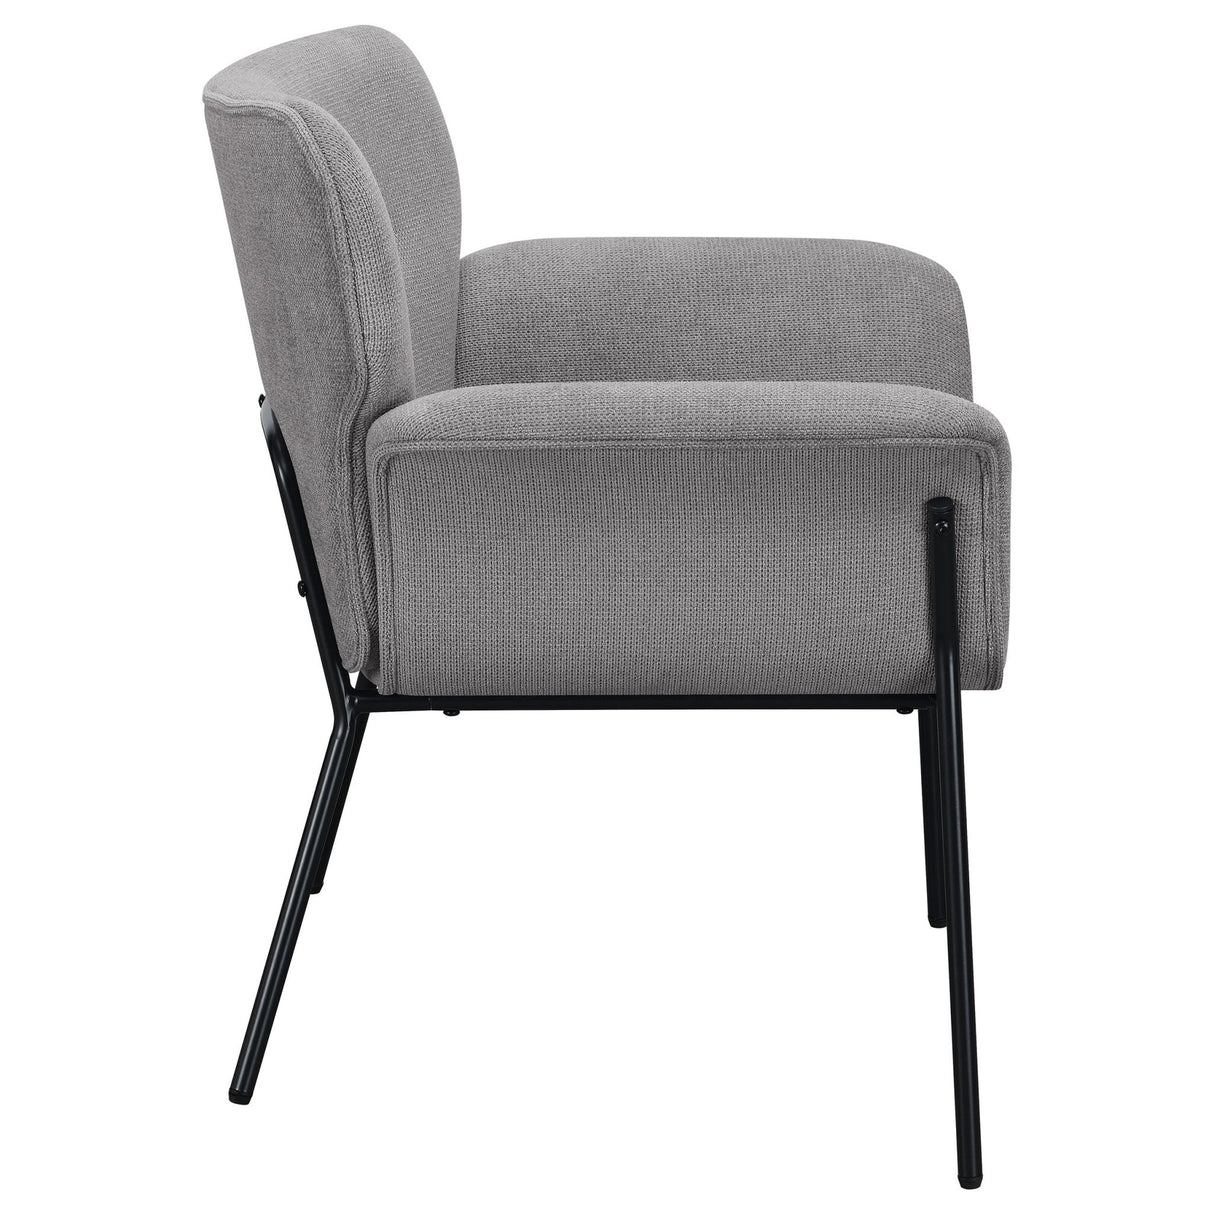 Accent Chair - Davina Upholstered Flared Arms Accent Chair Ash Grey